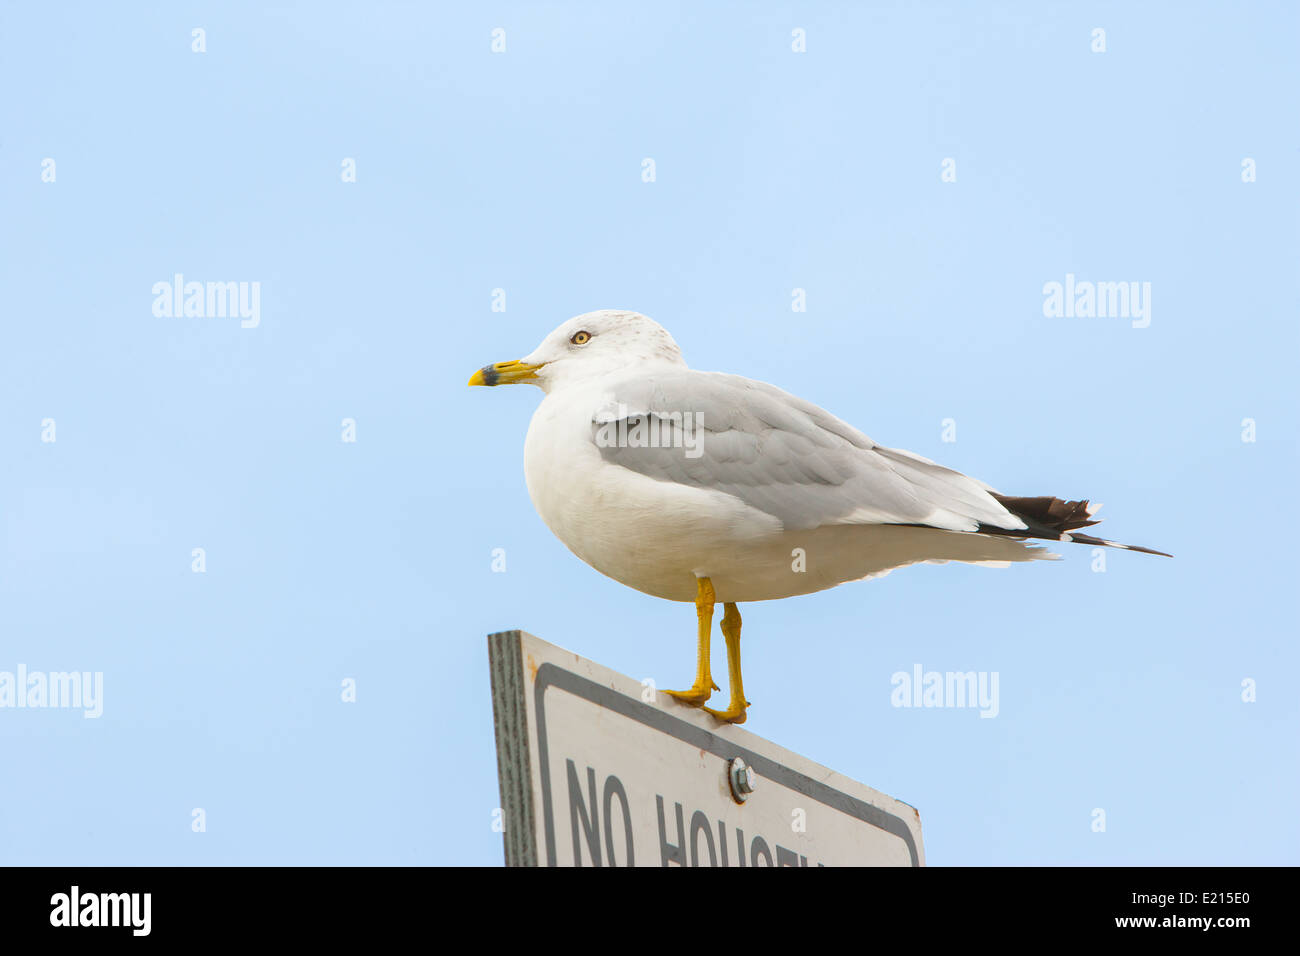 A seagull stands on a sign Stock Photo